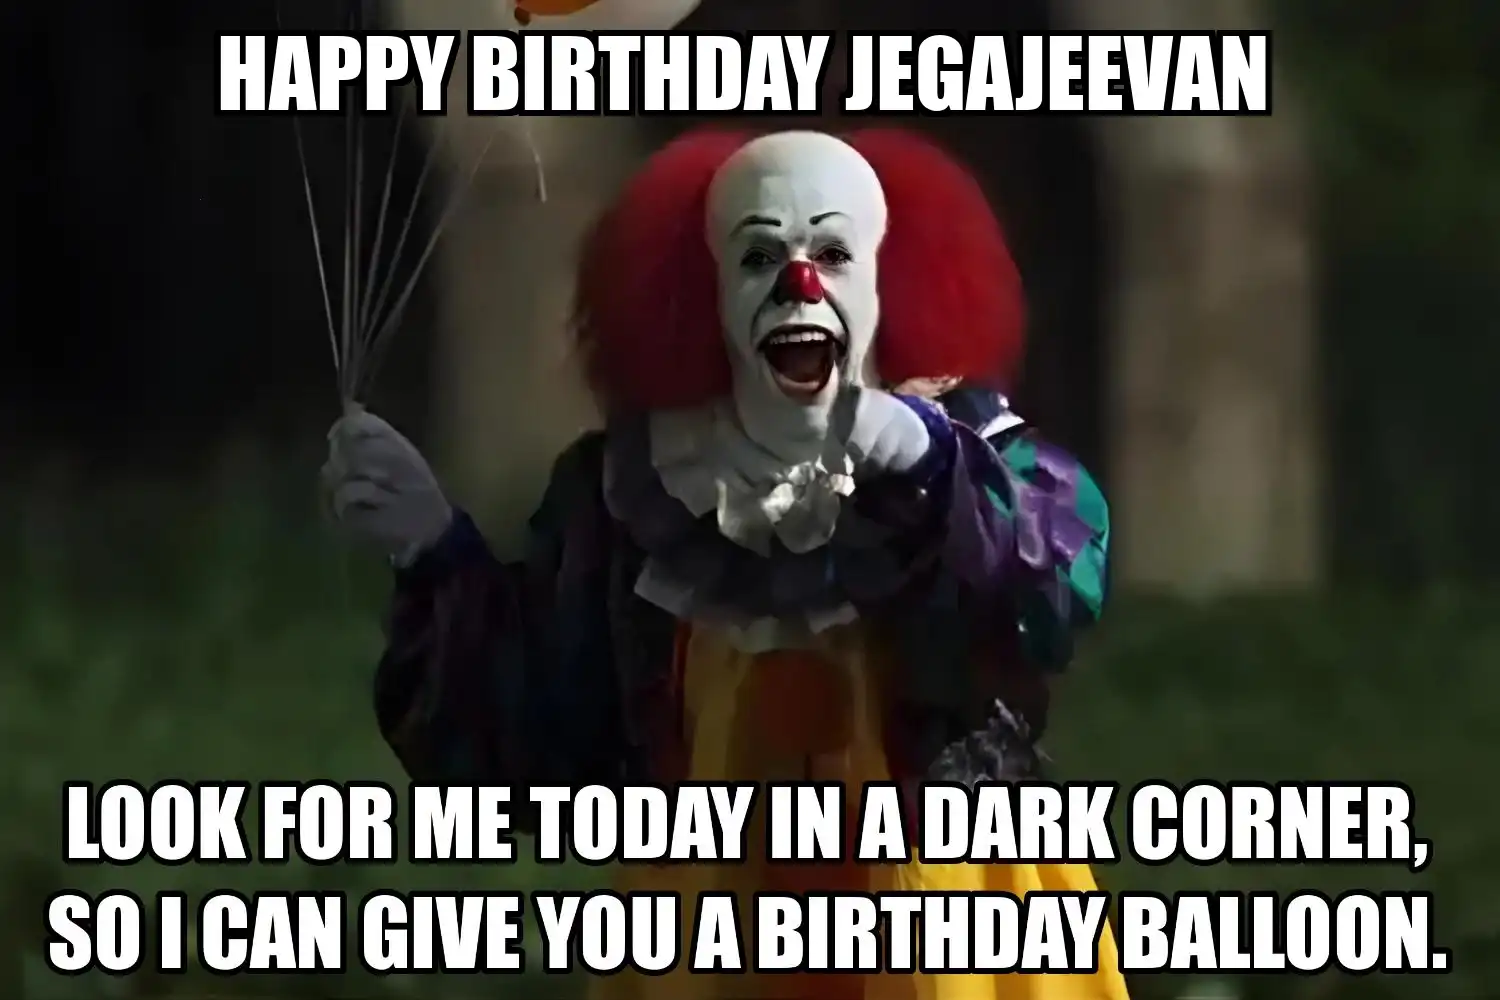 Happy Birthday Jegajeevan I Can Give You A Balloon Meme